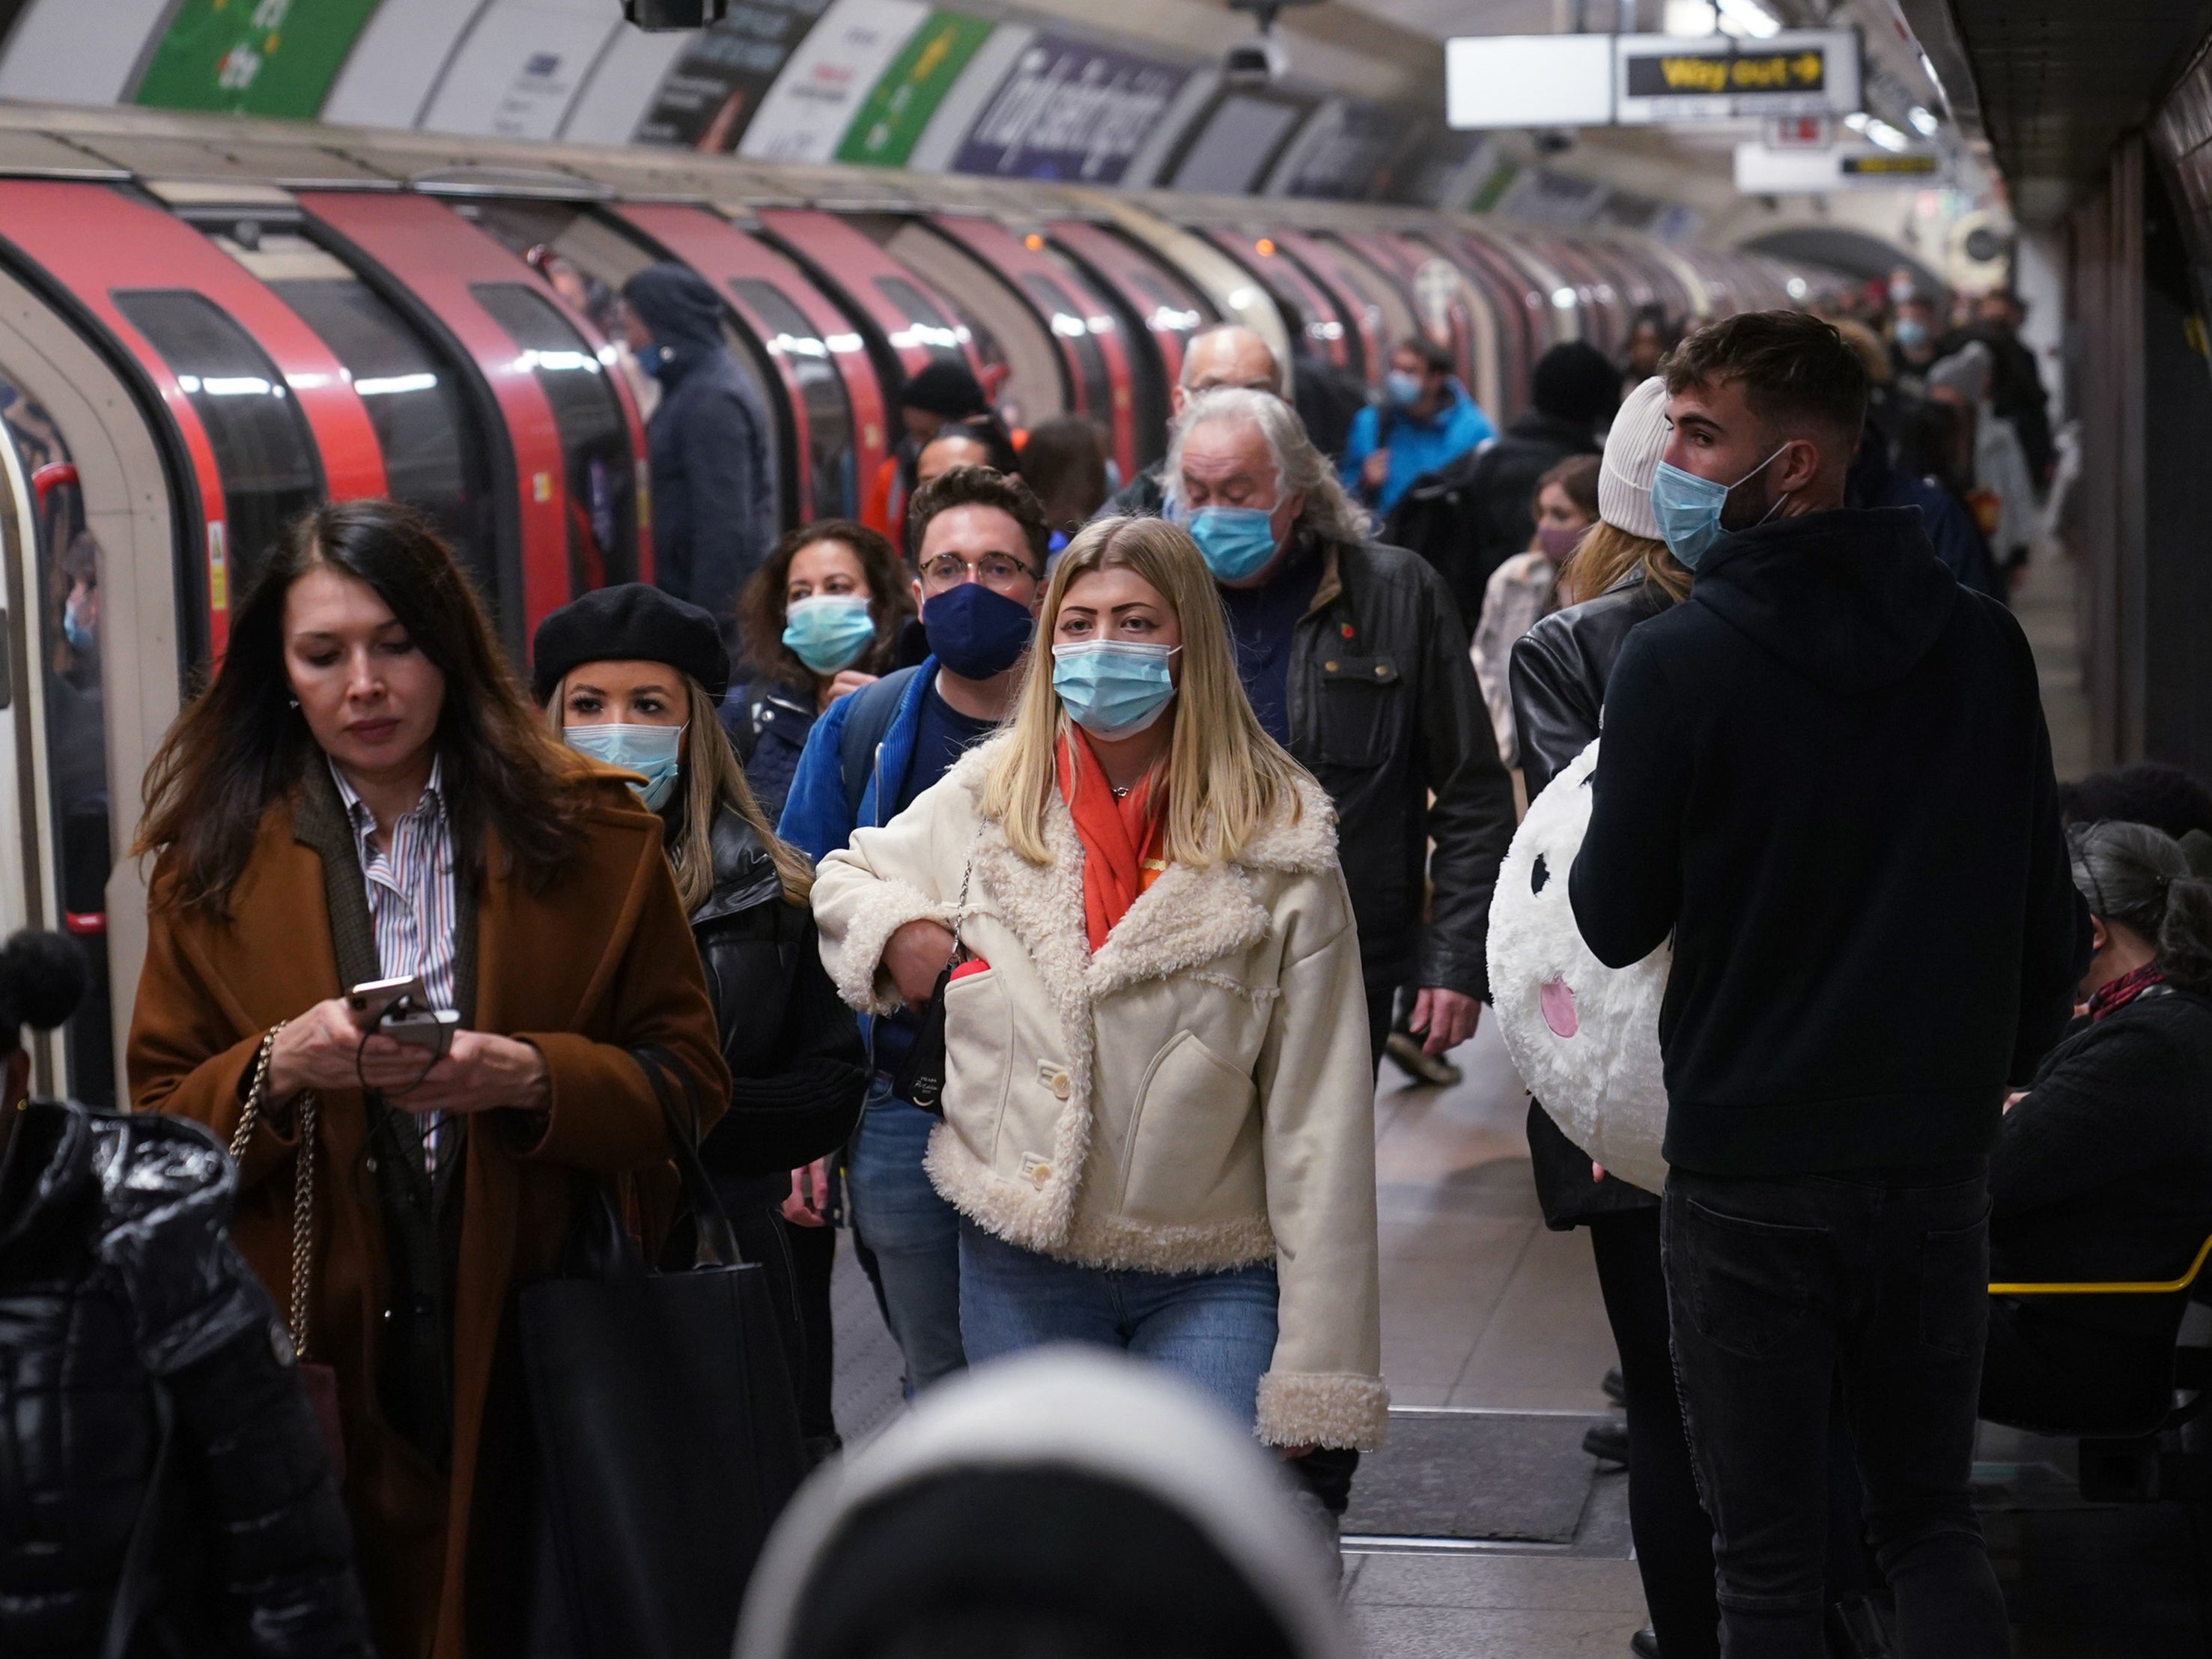 File photo: Commuters on the Tube network in London wear masks during a rise in Covid cases